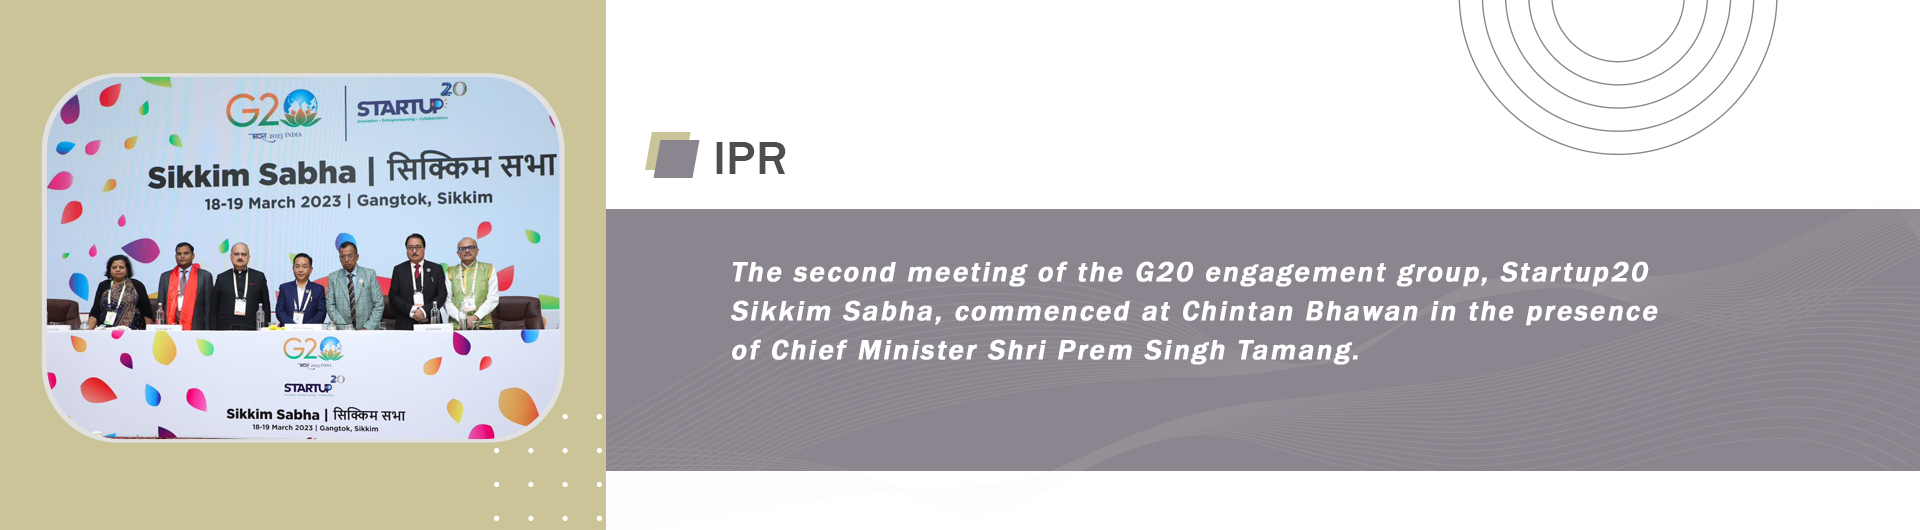 The second meeting of the G20 engagement group, Startup20 Sikkim Sabha, commenced at Chintan Bhawan in the presence of Chief Minister Shri Prem Singh Tamang